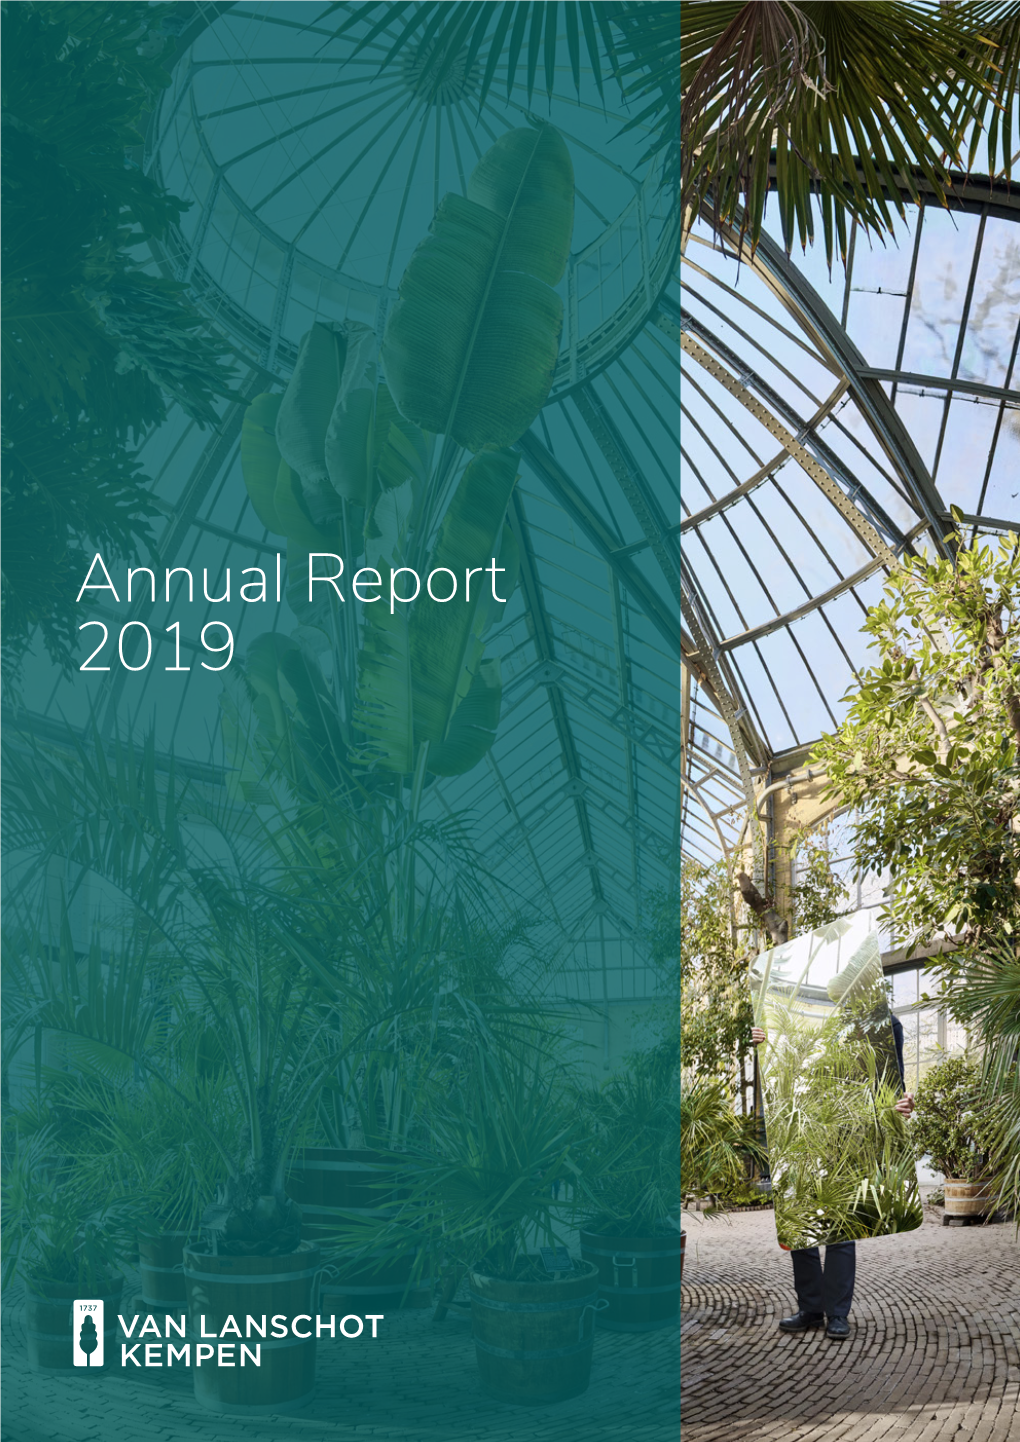 Annual Report 2019 NOTES to the READER